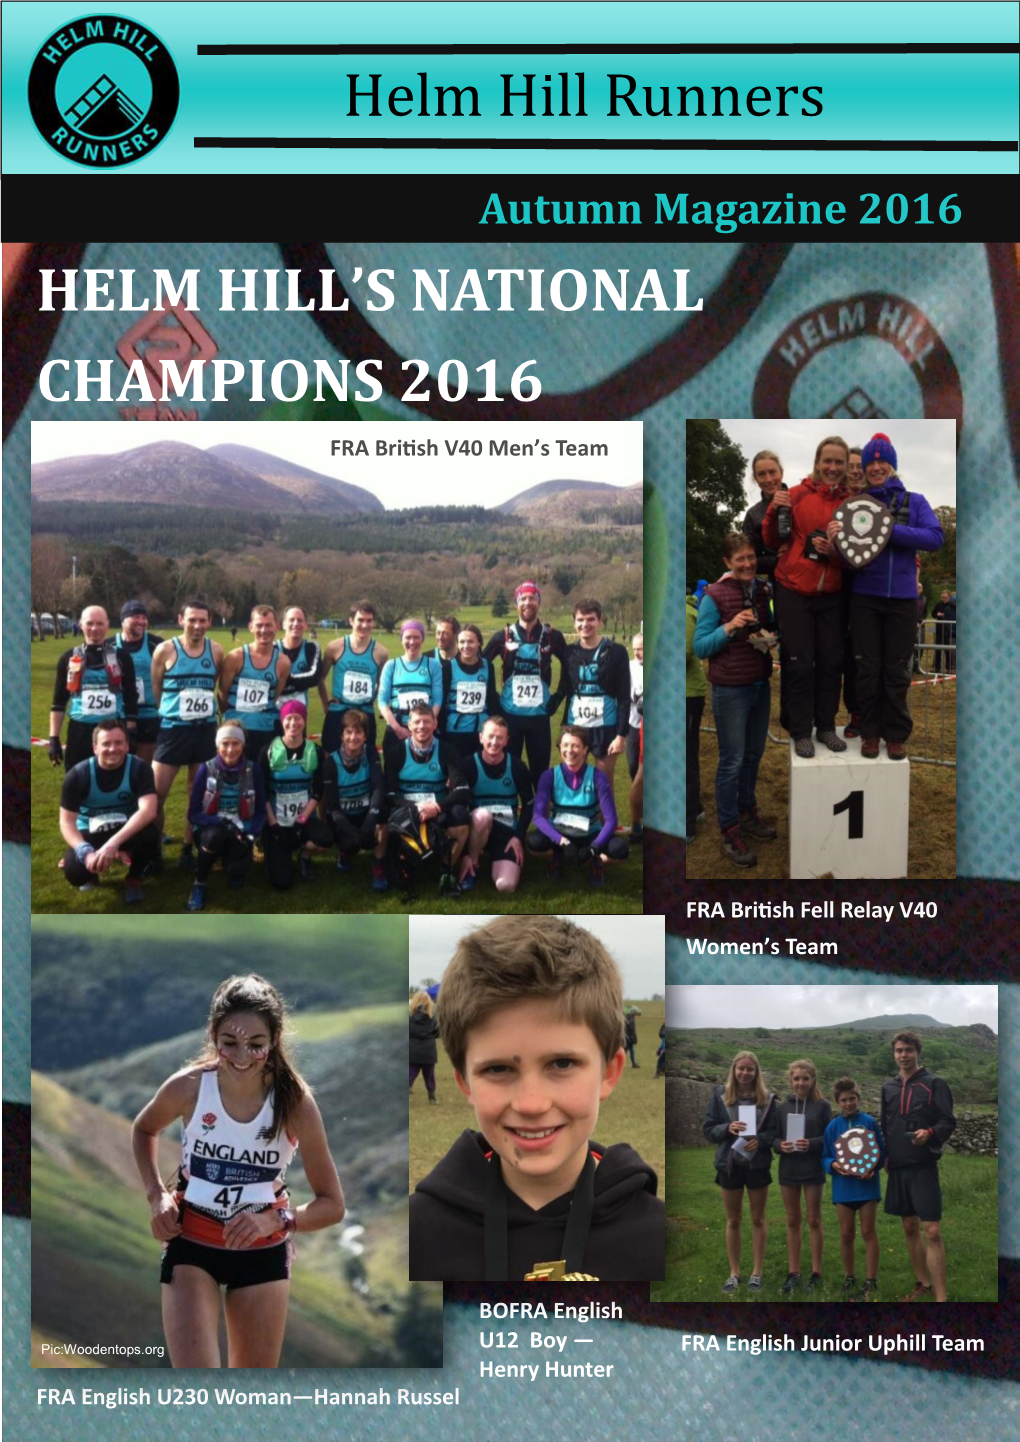 Helm Hill Runners HELM HILL's NATIONAL CHAMPIONS 2016